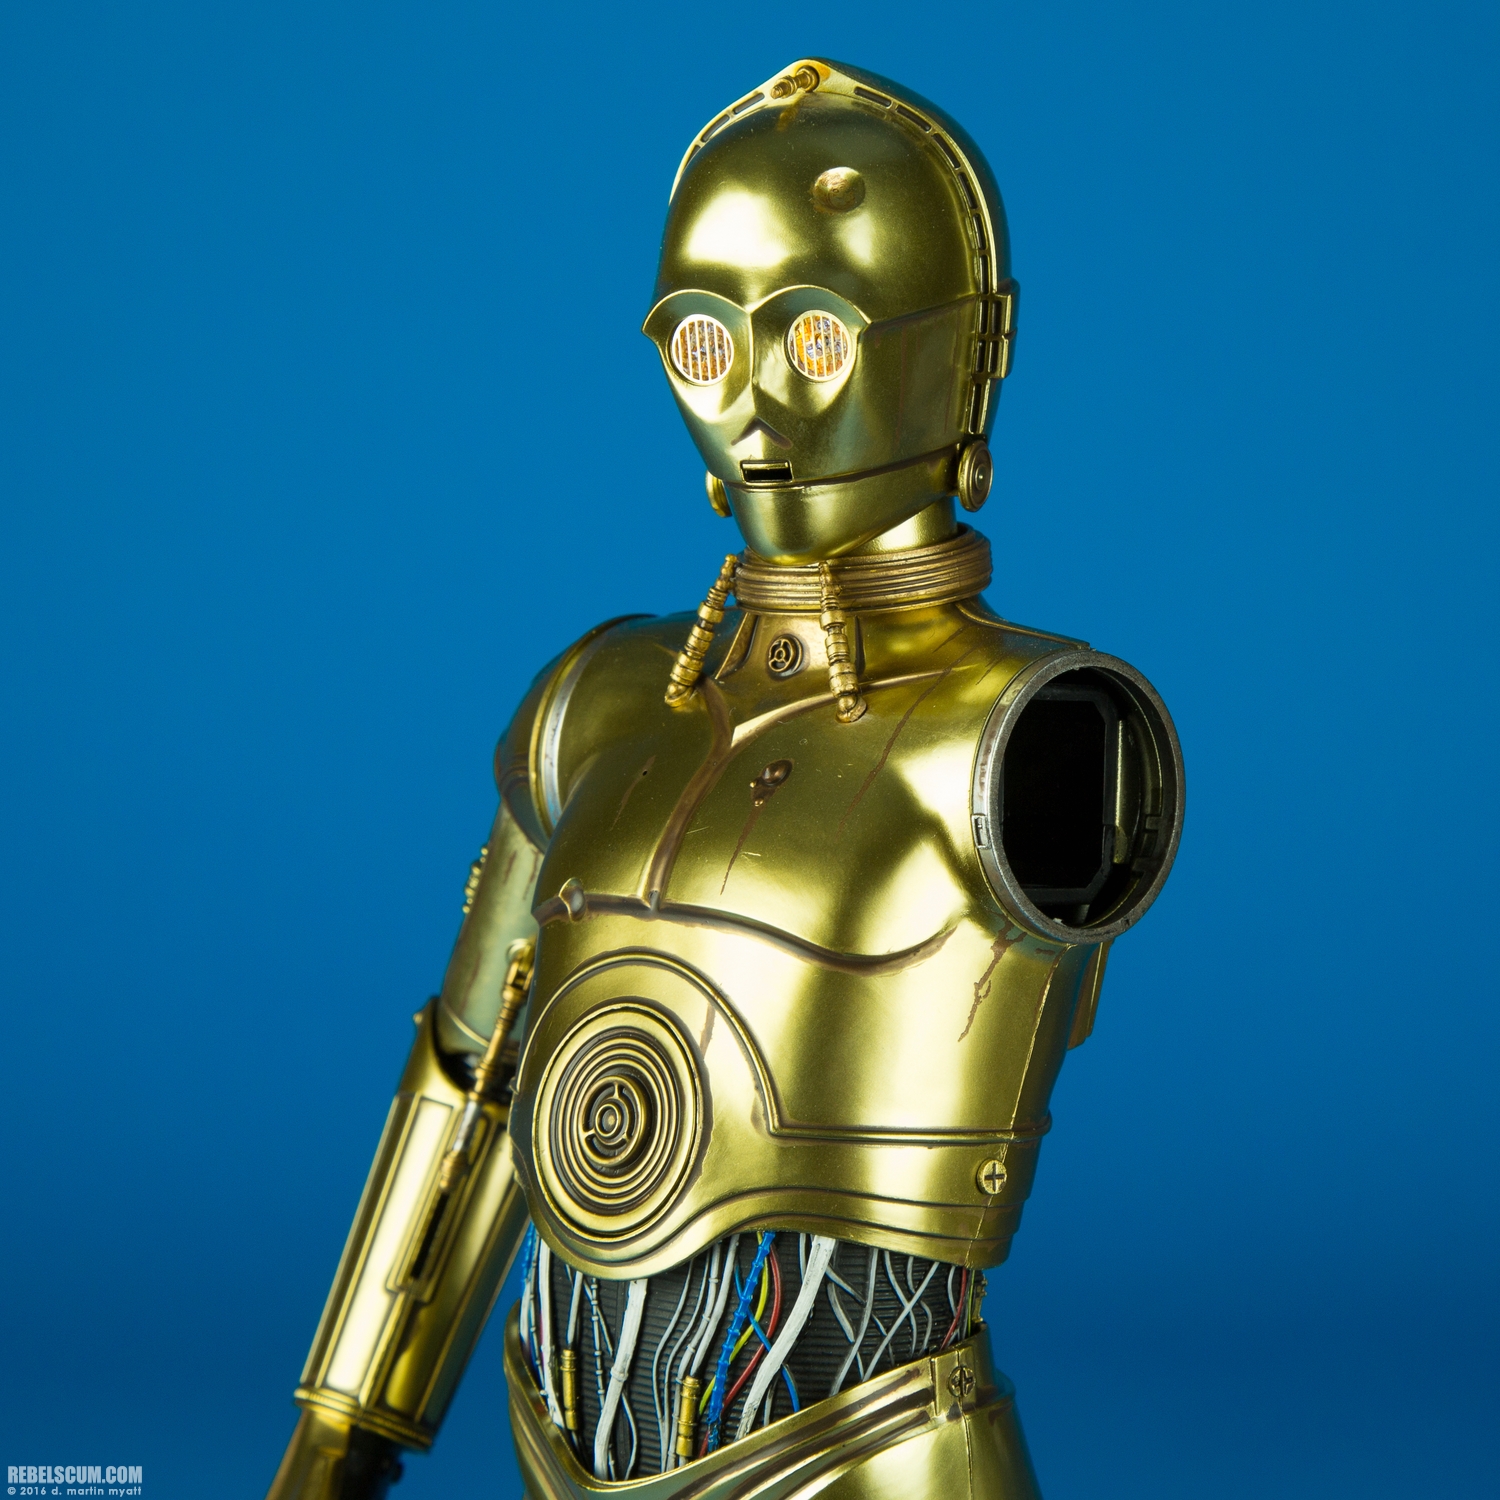 C-3PO-Sixth-Scale-Figure-Sideshow-Collectibles-015.jpg